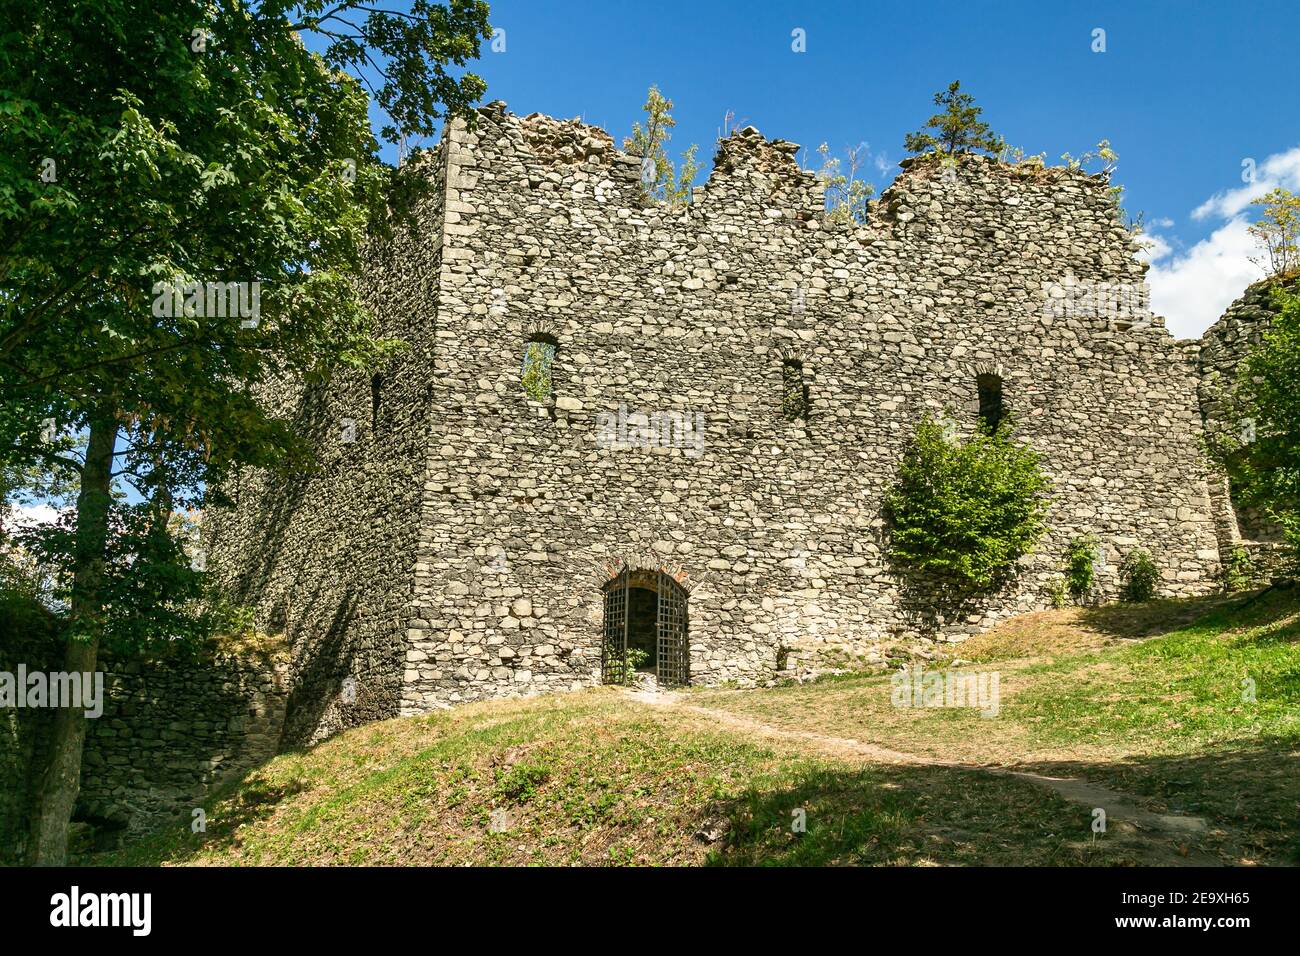 Andelska hora, Czech Republic - August 11 2018: Remains of the stone castle from 15th century, standing on a hill with green trees and dry grass. Stock Photo